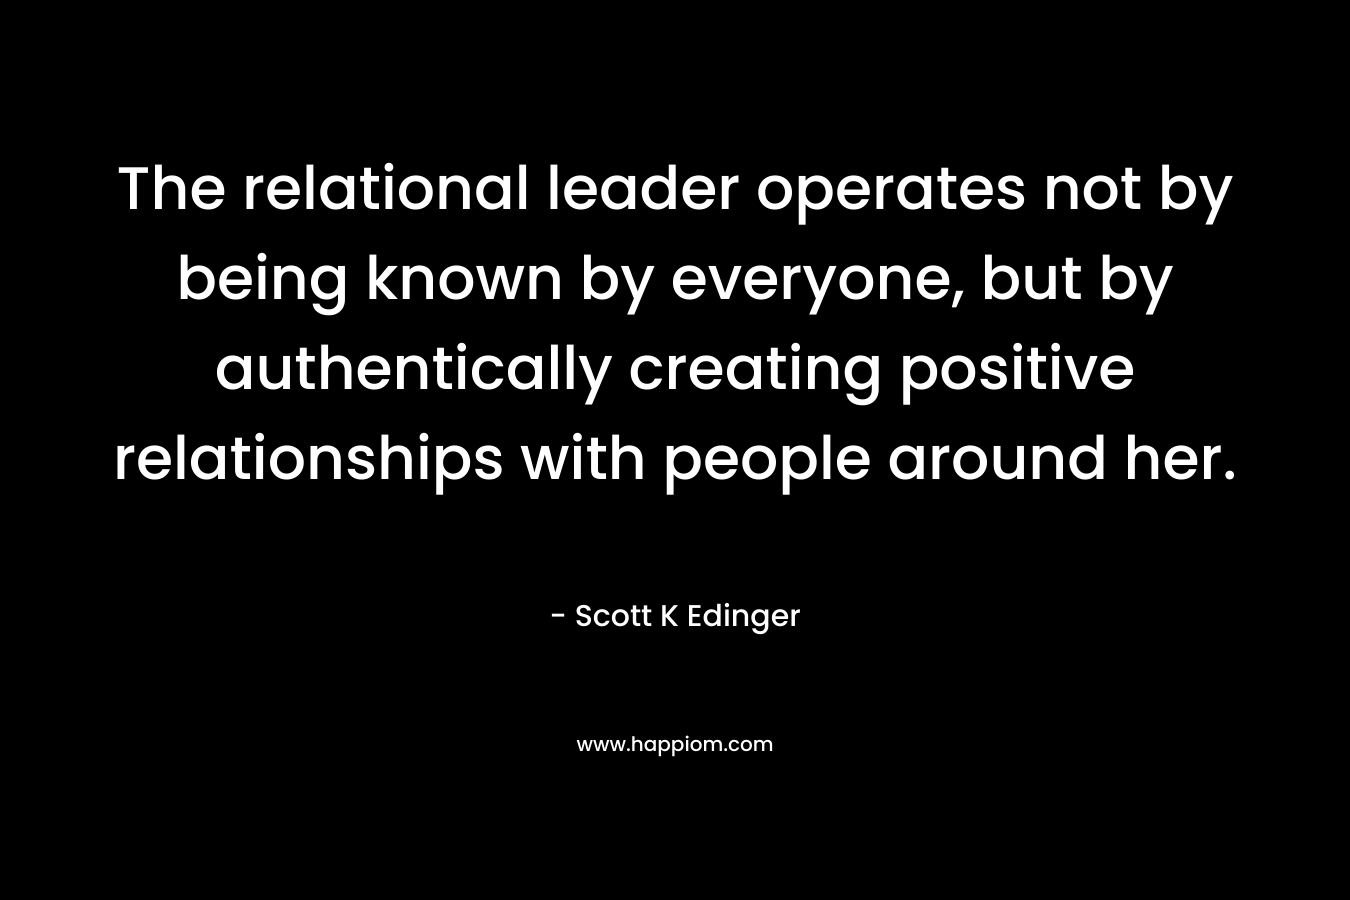 The relational leader operates not by being known by everyone, but by authentically creating positive relationships with people around her. – Scott K Edinger